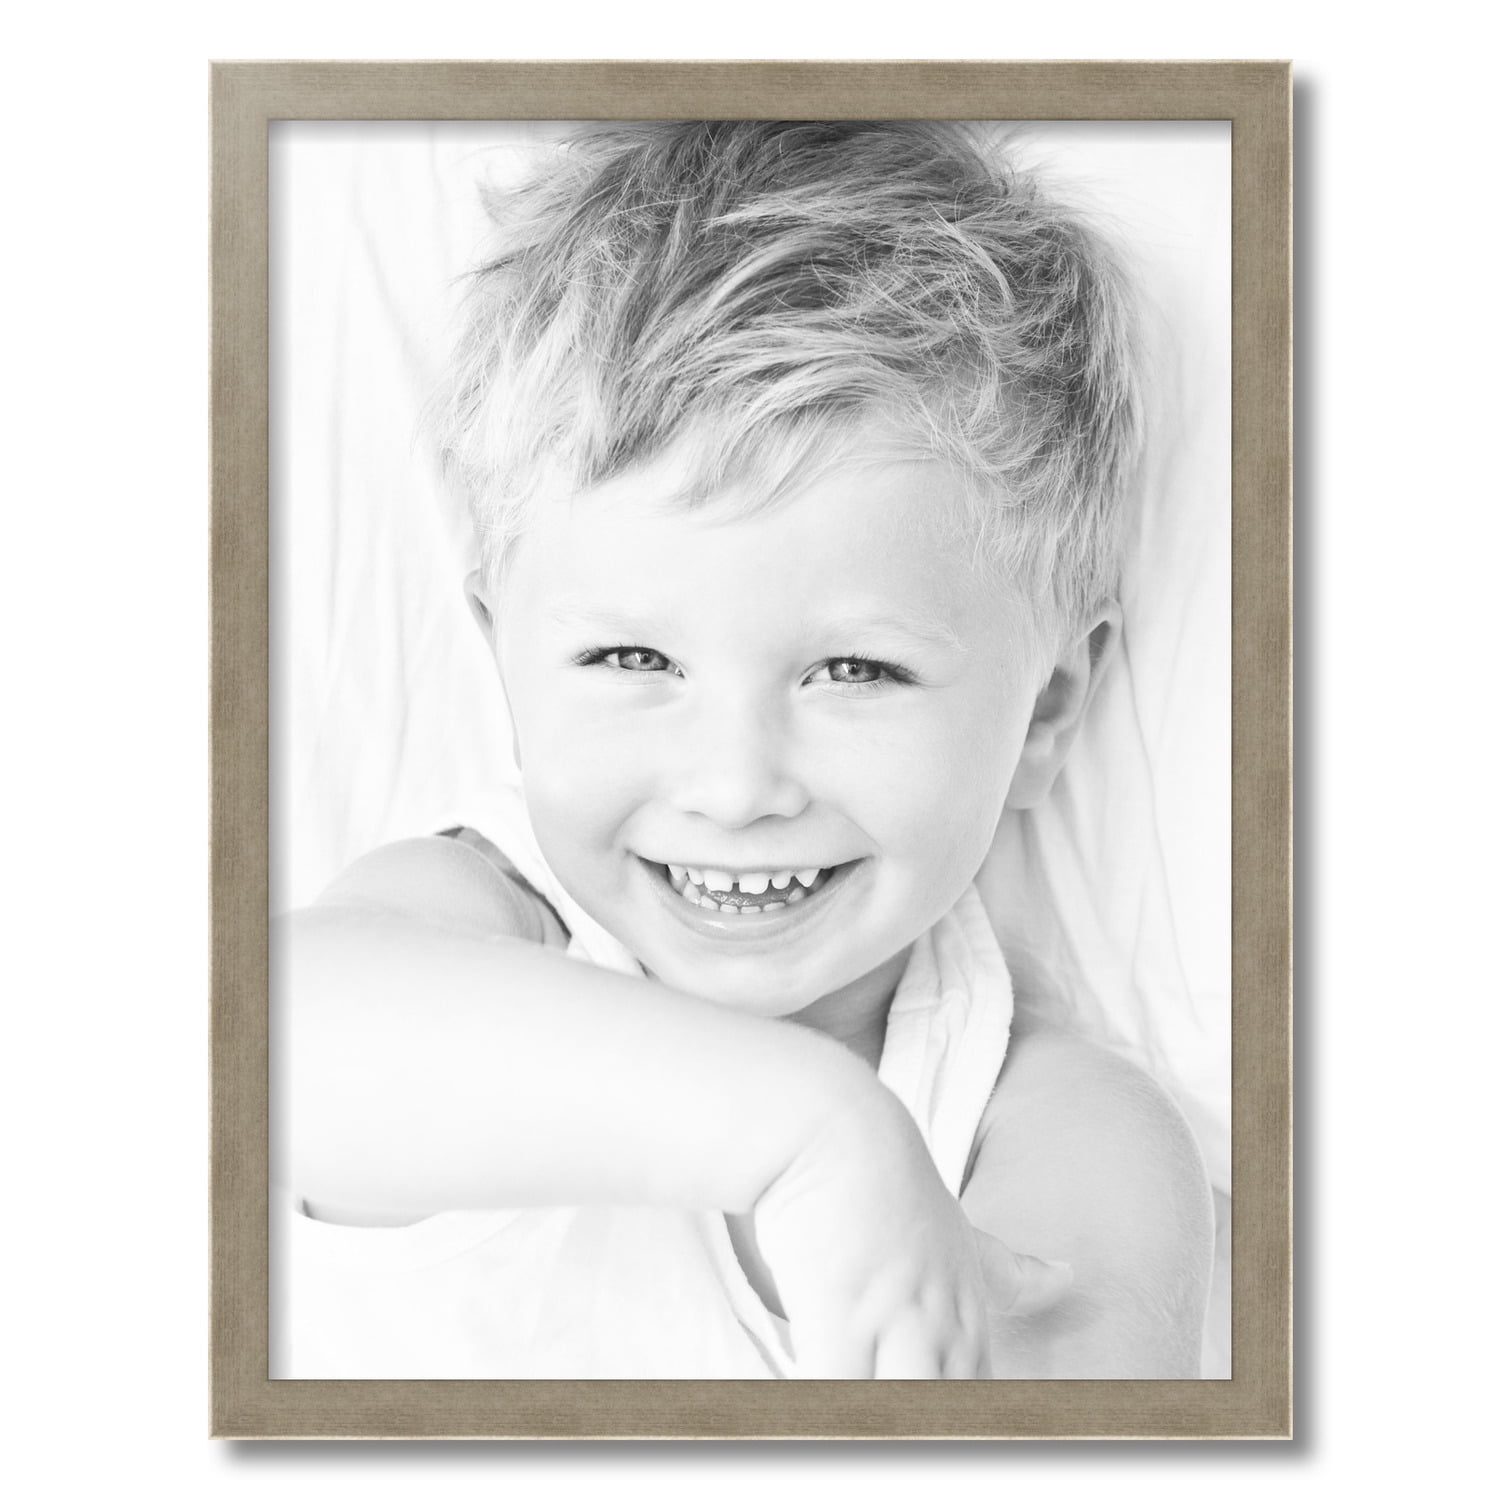 DODXIAOBEUL Poster Frame Artwork Picture Frame-Actual Fits 11 3/4x15 3/4  inch /30x40cm Photo,Print,Poster,Portrait or Artwork Frame Hanging Picture